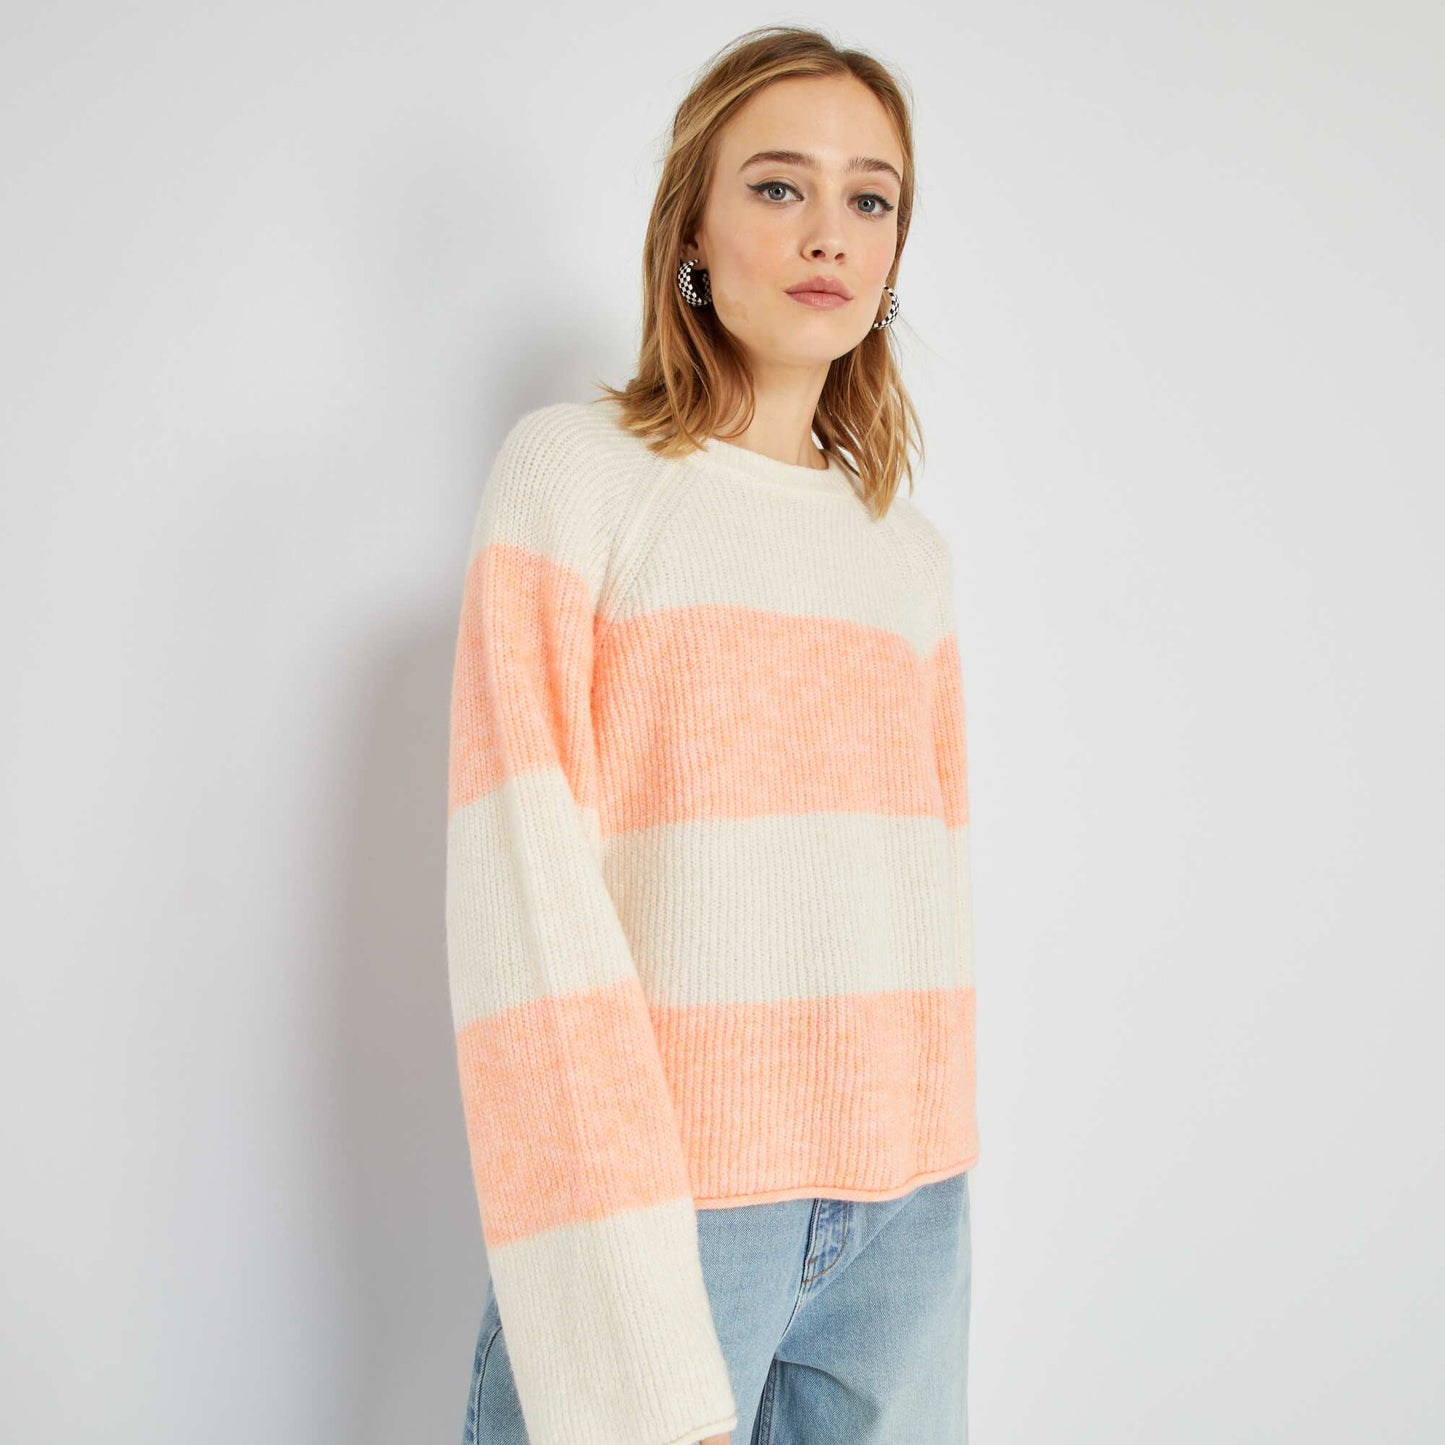 Pull marini re en maille tricot Rose